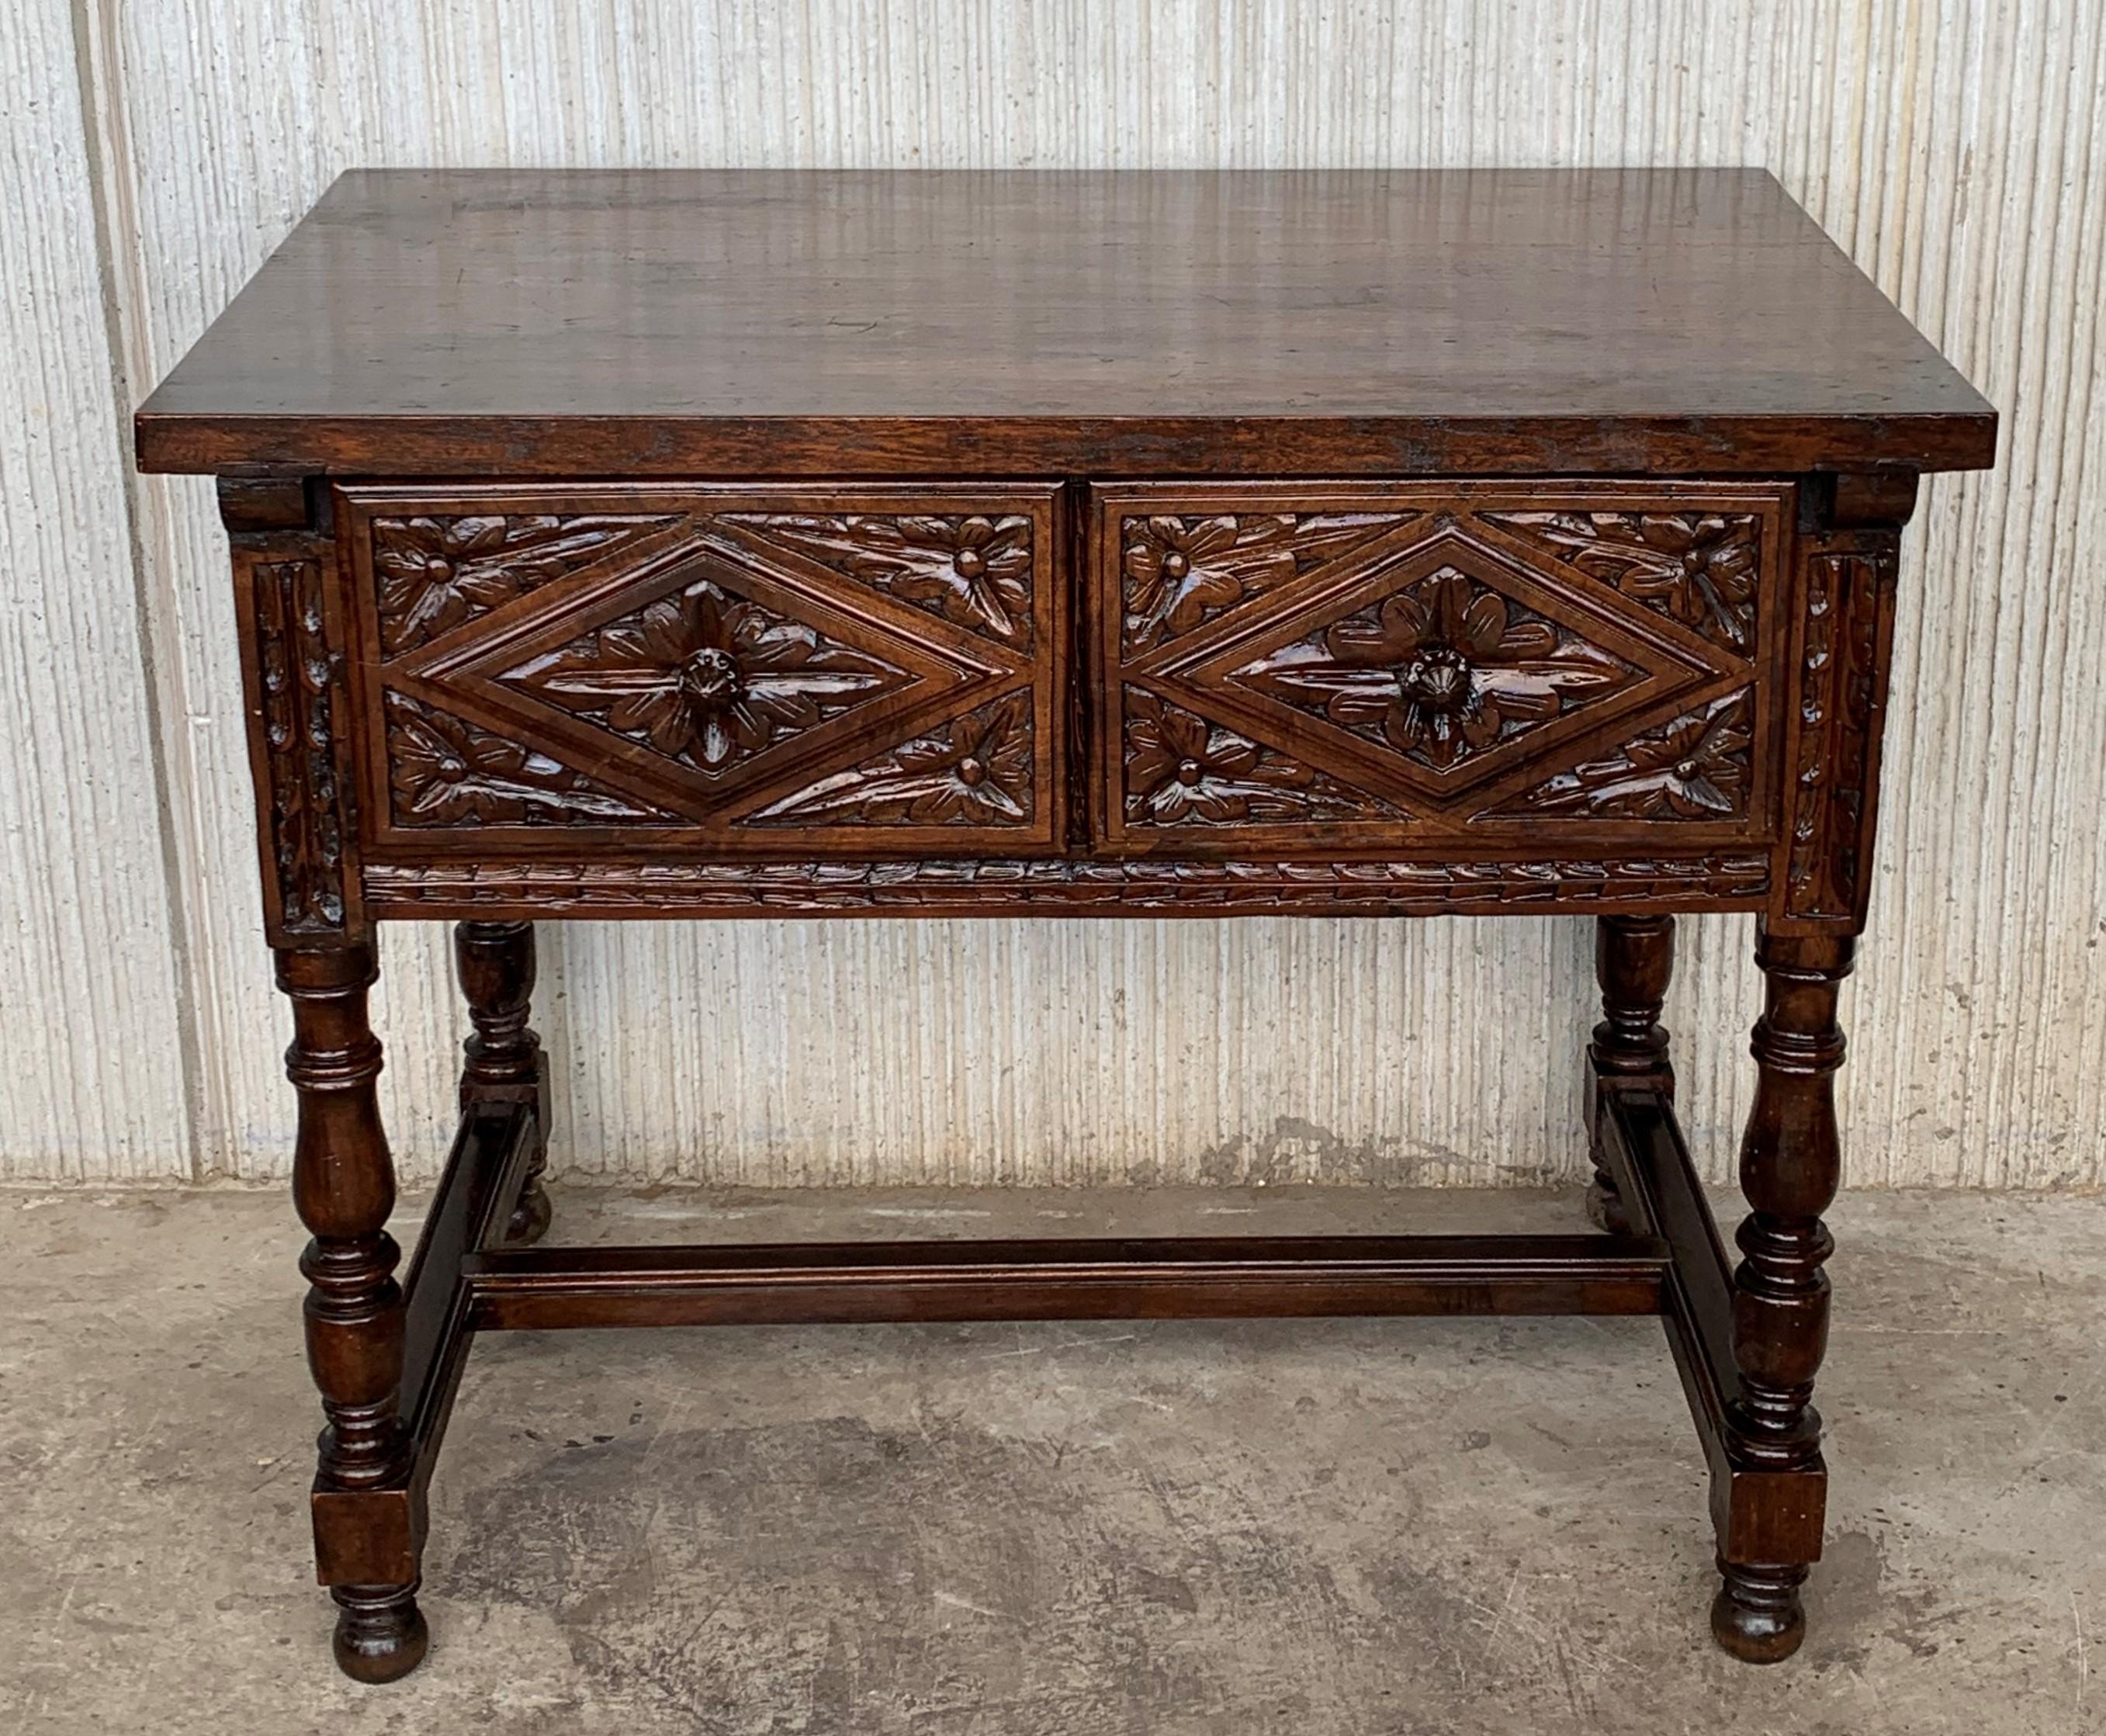 Baroque Revival Spanish Console Chest Table with Two Carved Drawers and Original Hardware